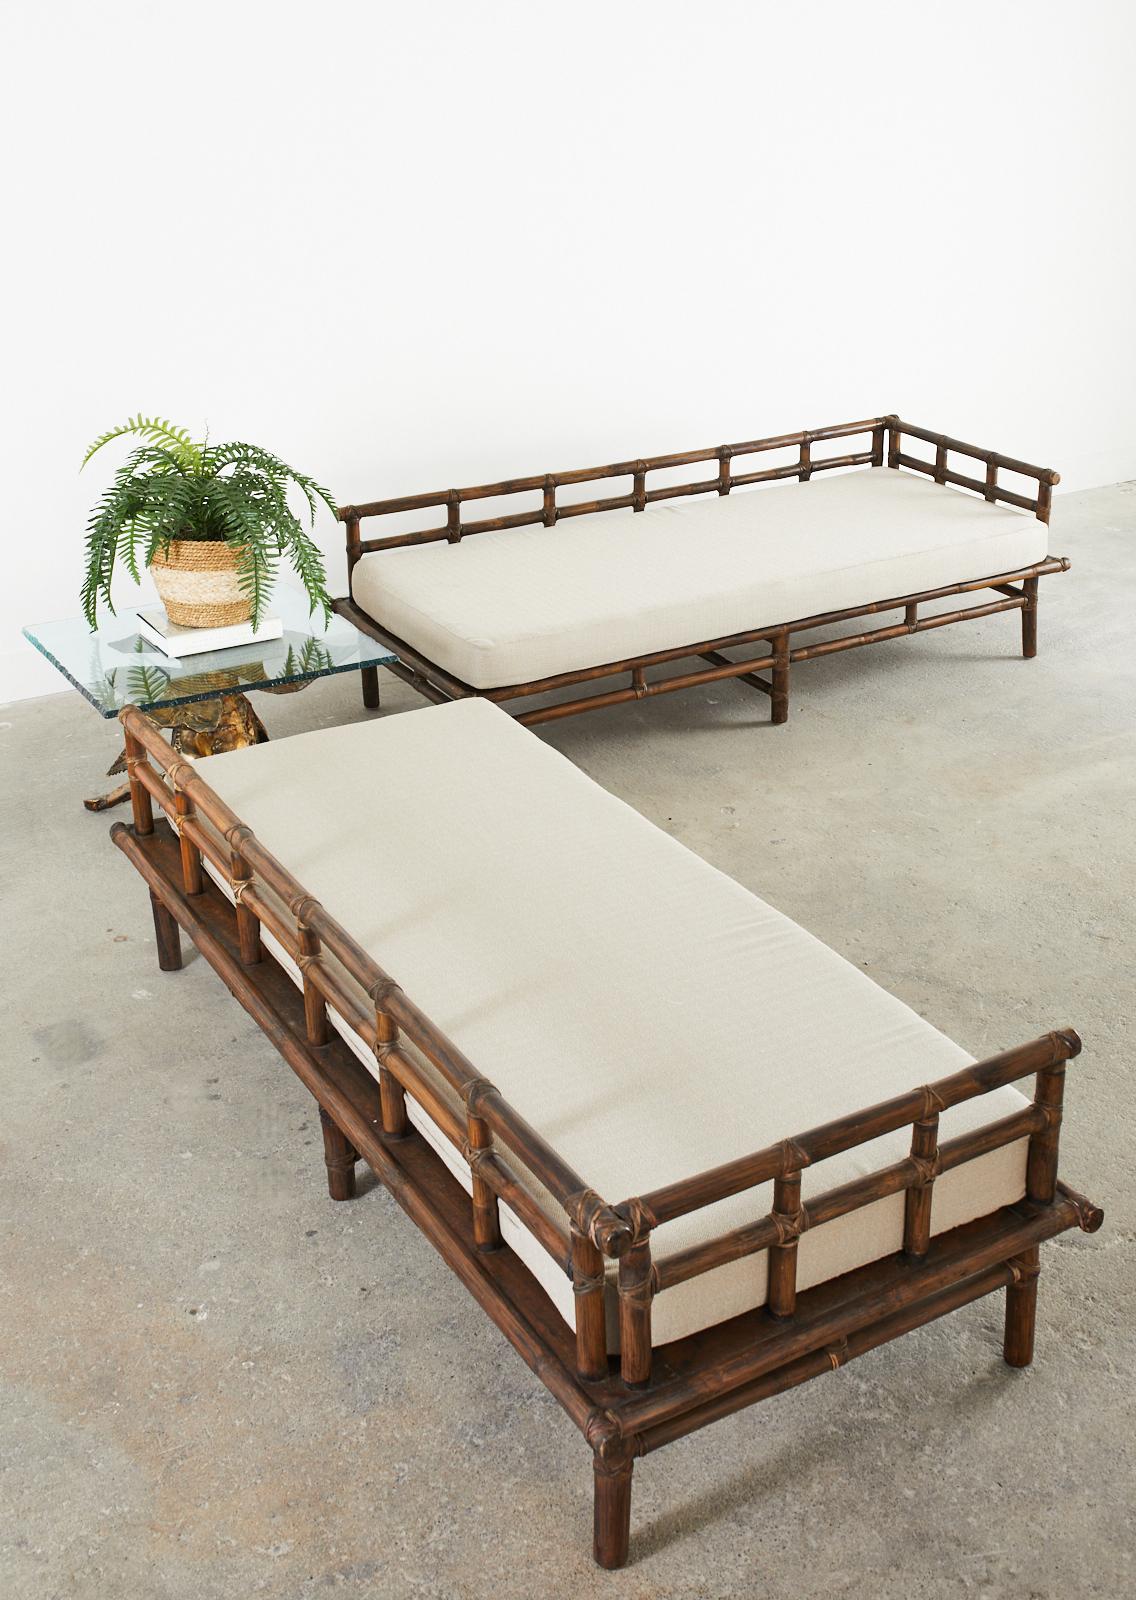 Distinctive pair of matching bamboo rattan daybeds or sofas hand-crafted in the California organic modern style by McGuire. The pair feature a sturdy rattan and oak frame lashed together with leather rawhide laces and end caps. The back supports